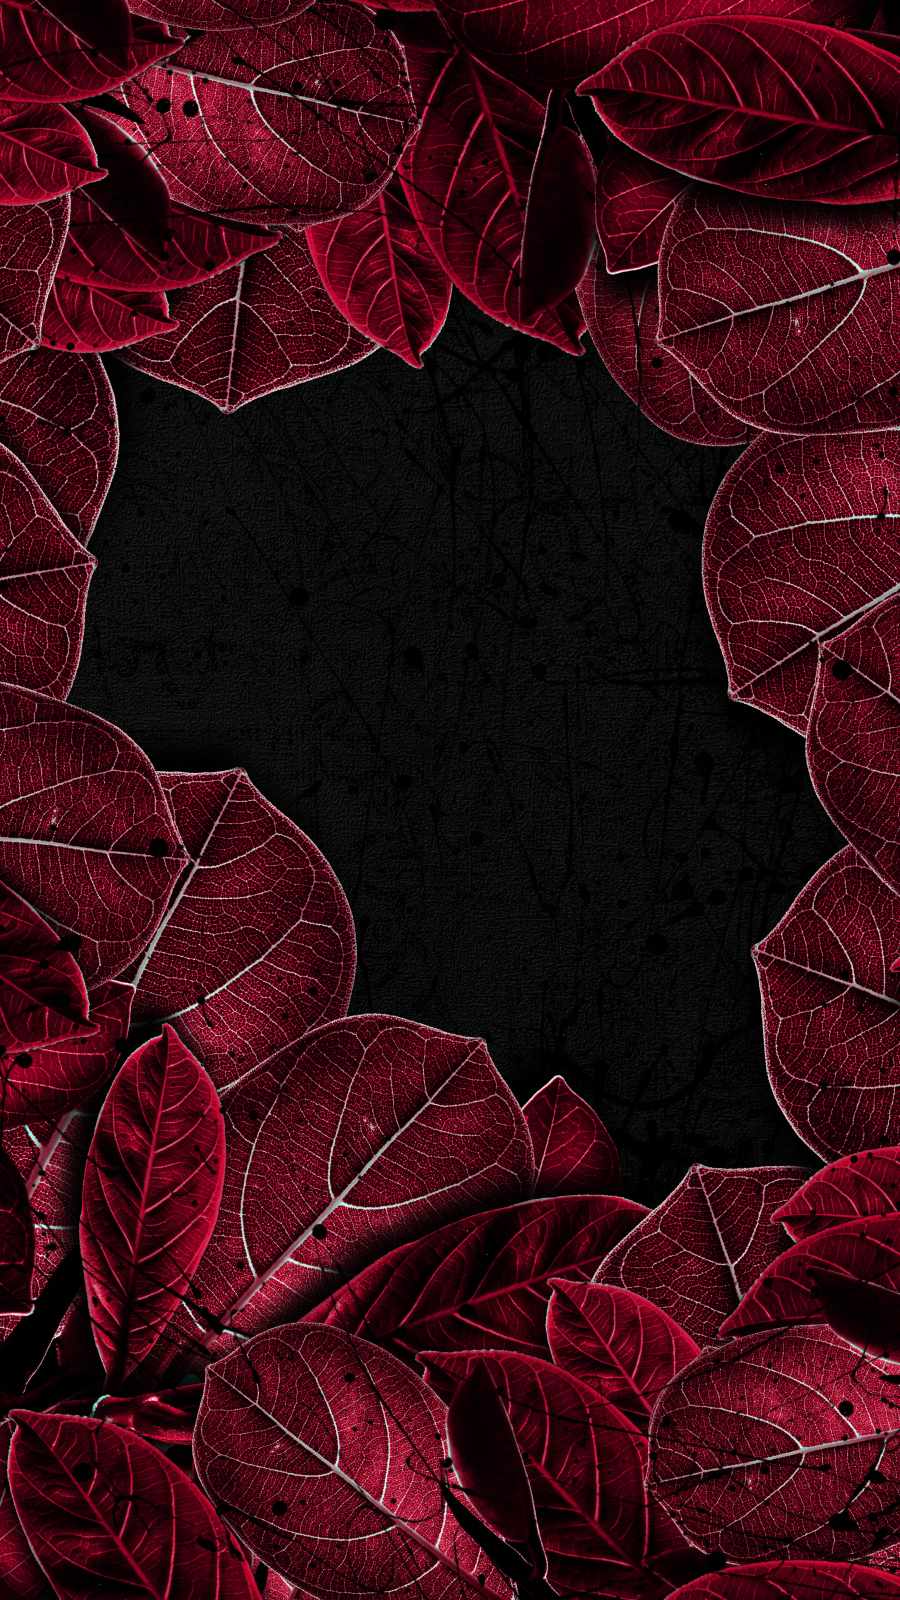 Red Leaves IPhone Wallpaper  IPhone Wallpapers